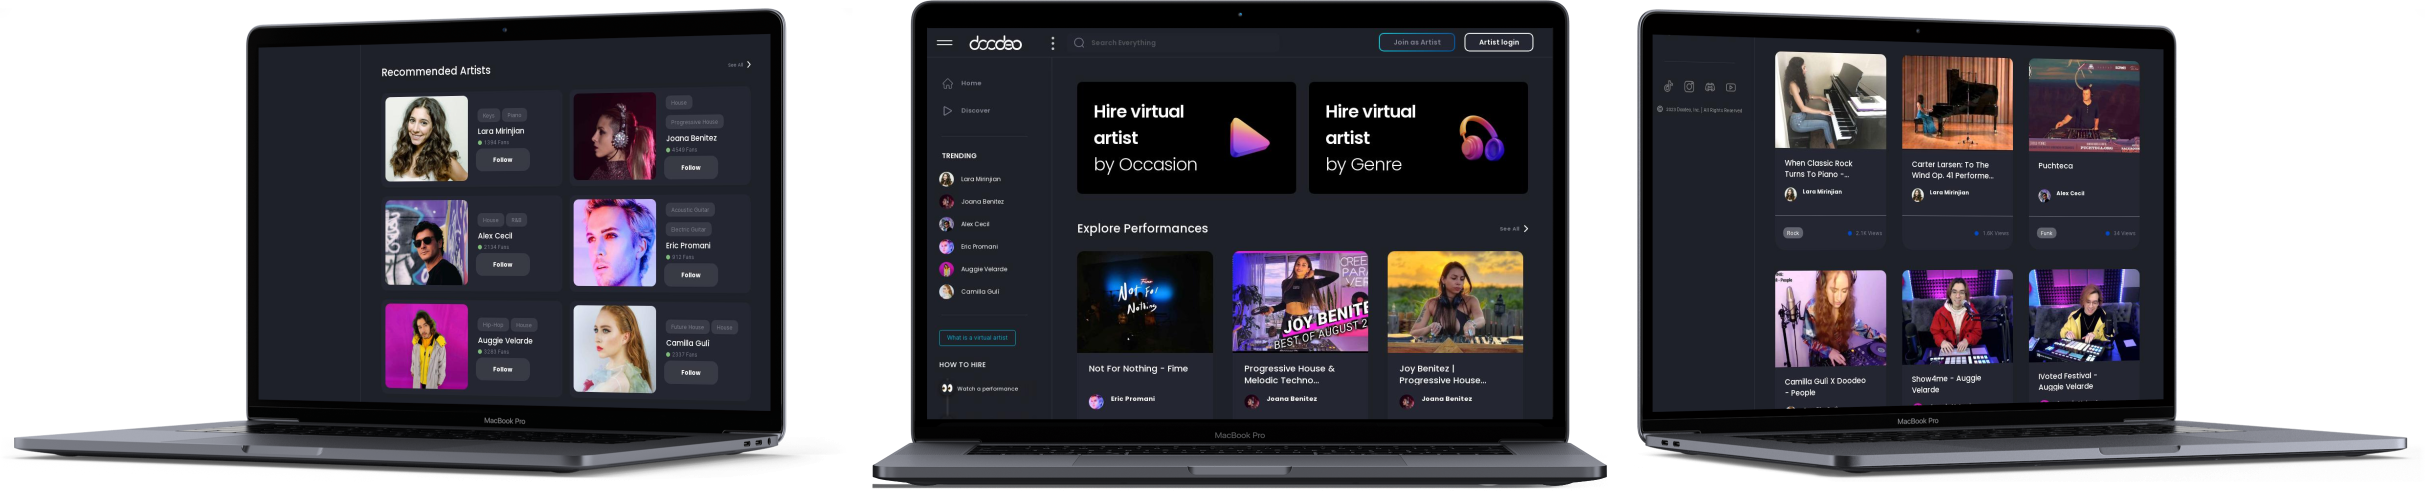 Image of a project called Doodeo displayed in macbook